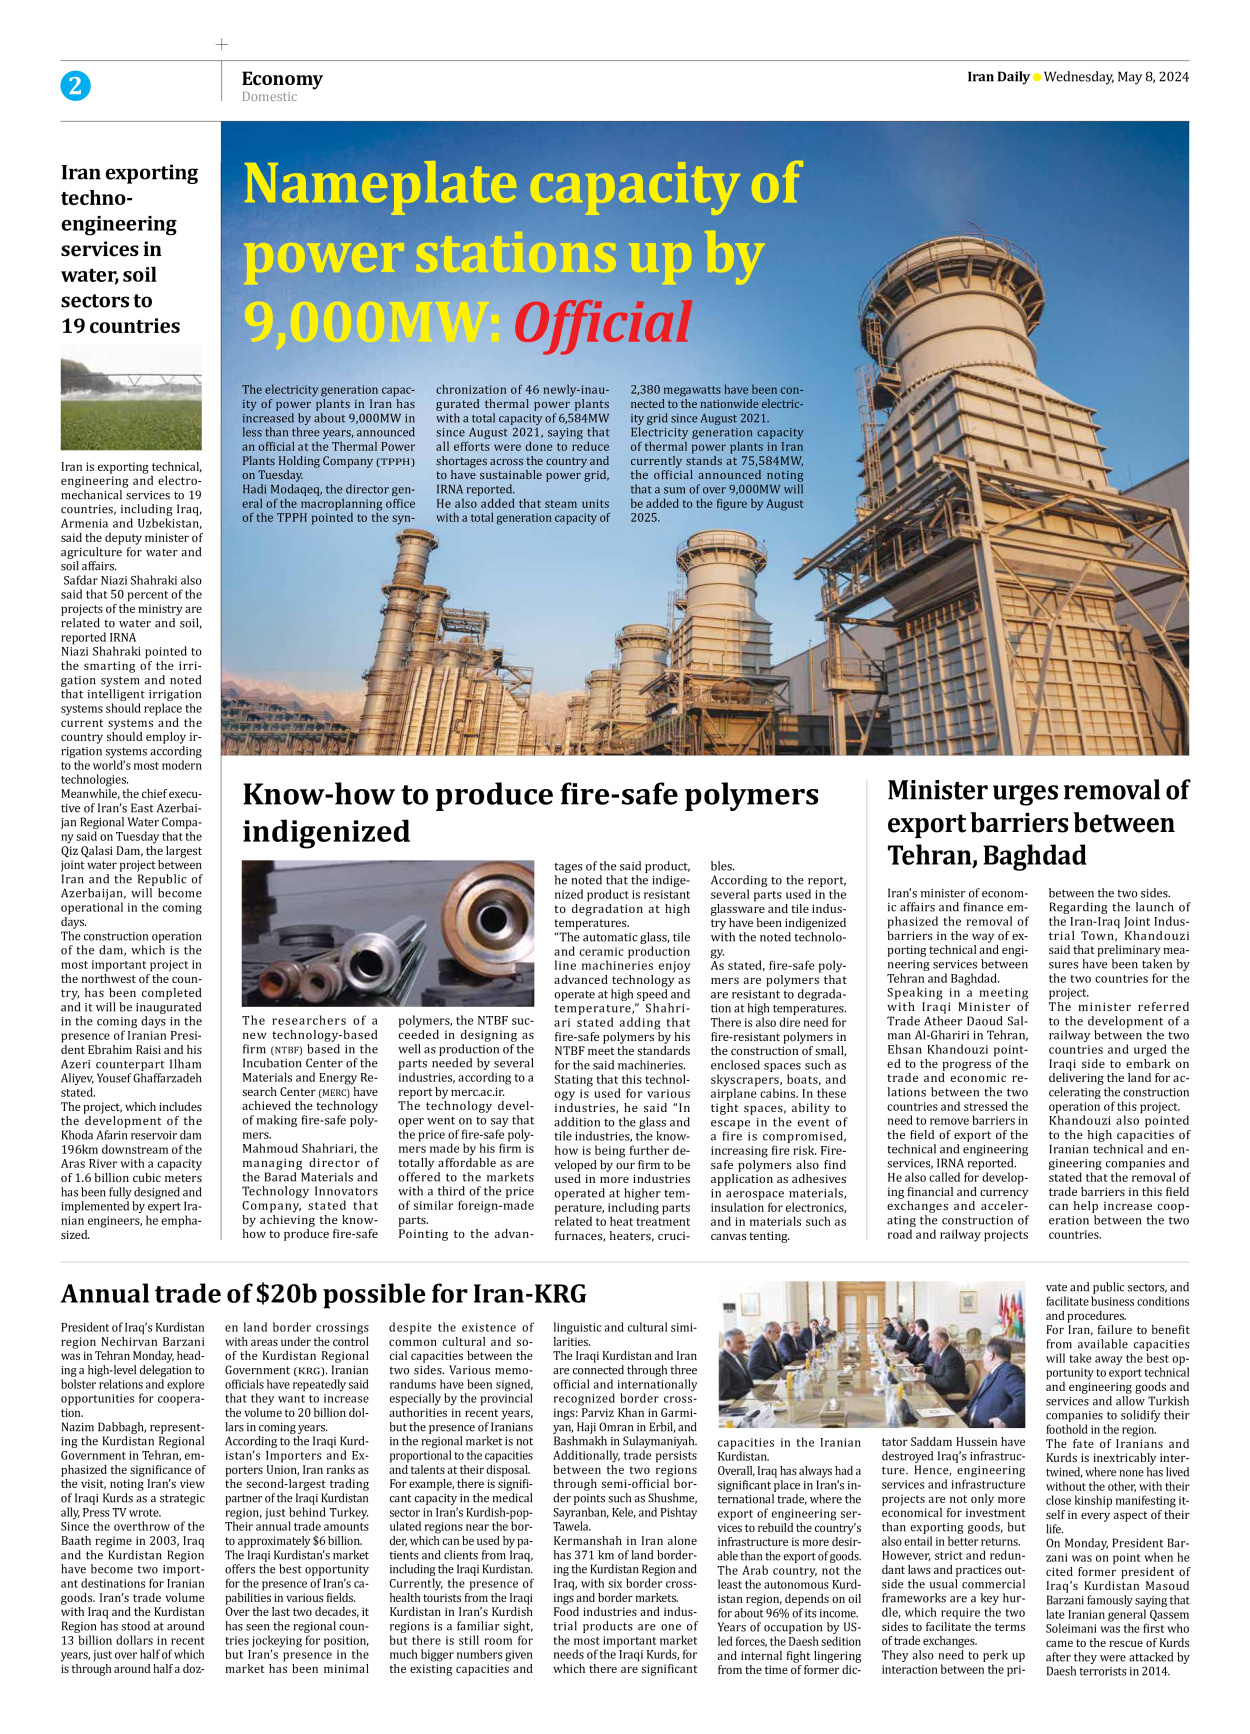 Iran Daily - Number Seven Thousand Five Hundred and Fifty Two - 08 May 2024 - Page 2